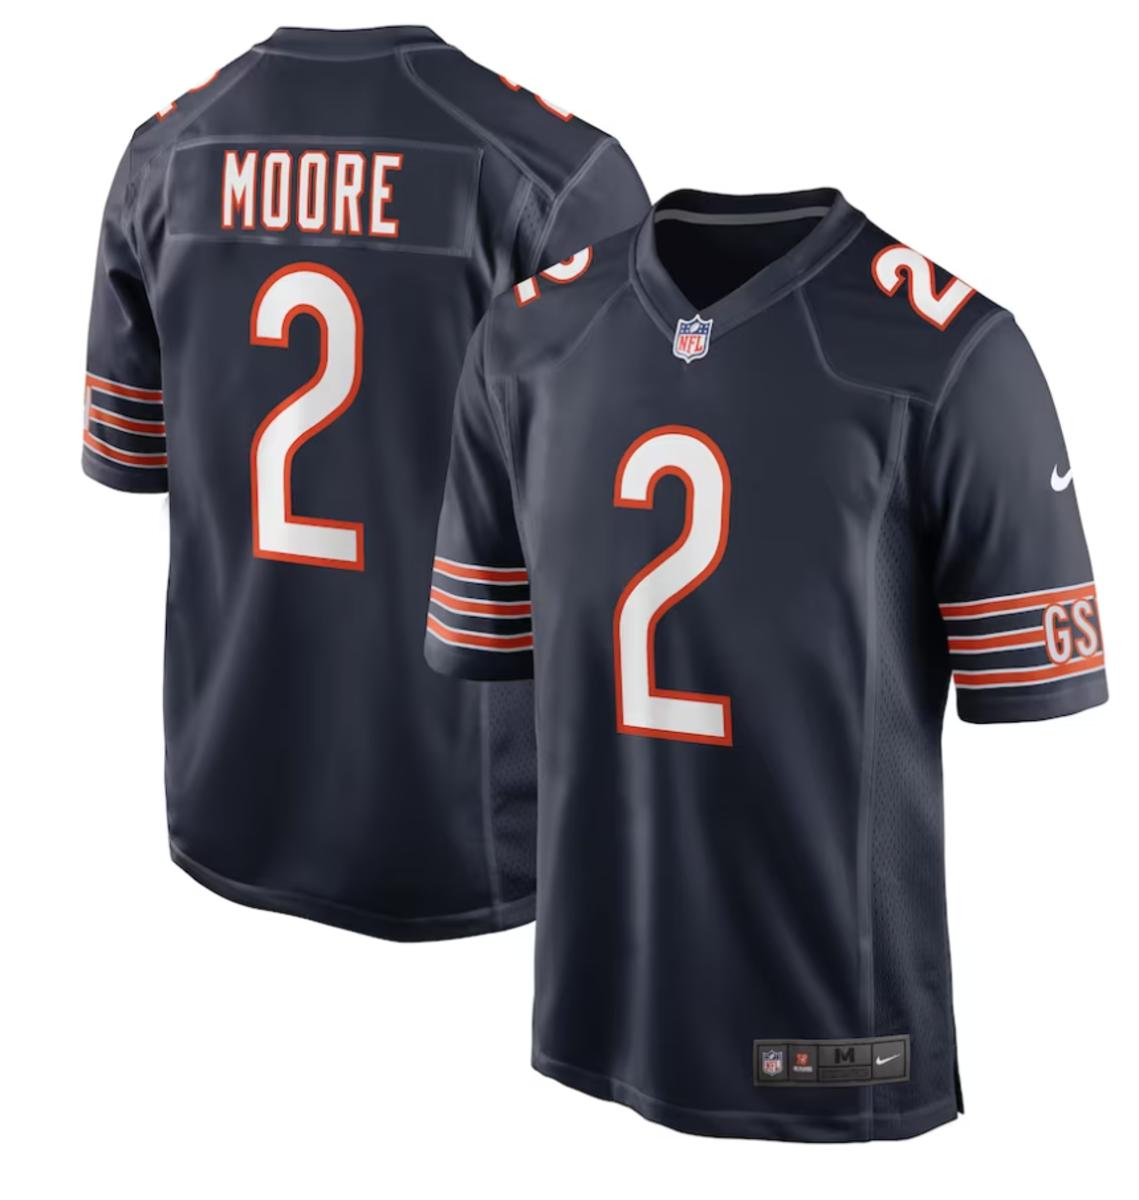 D.J. Moore Chicago Bears Nike Team Color Game Jersey - $129.99